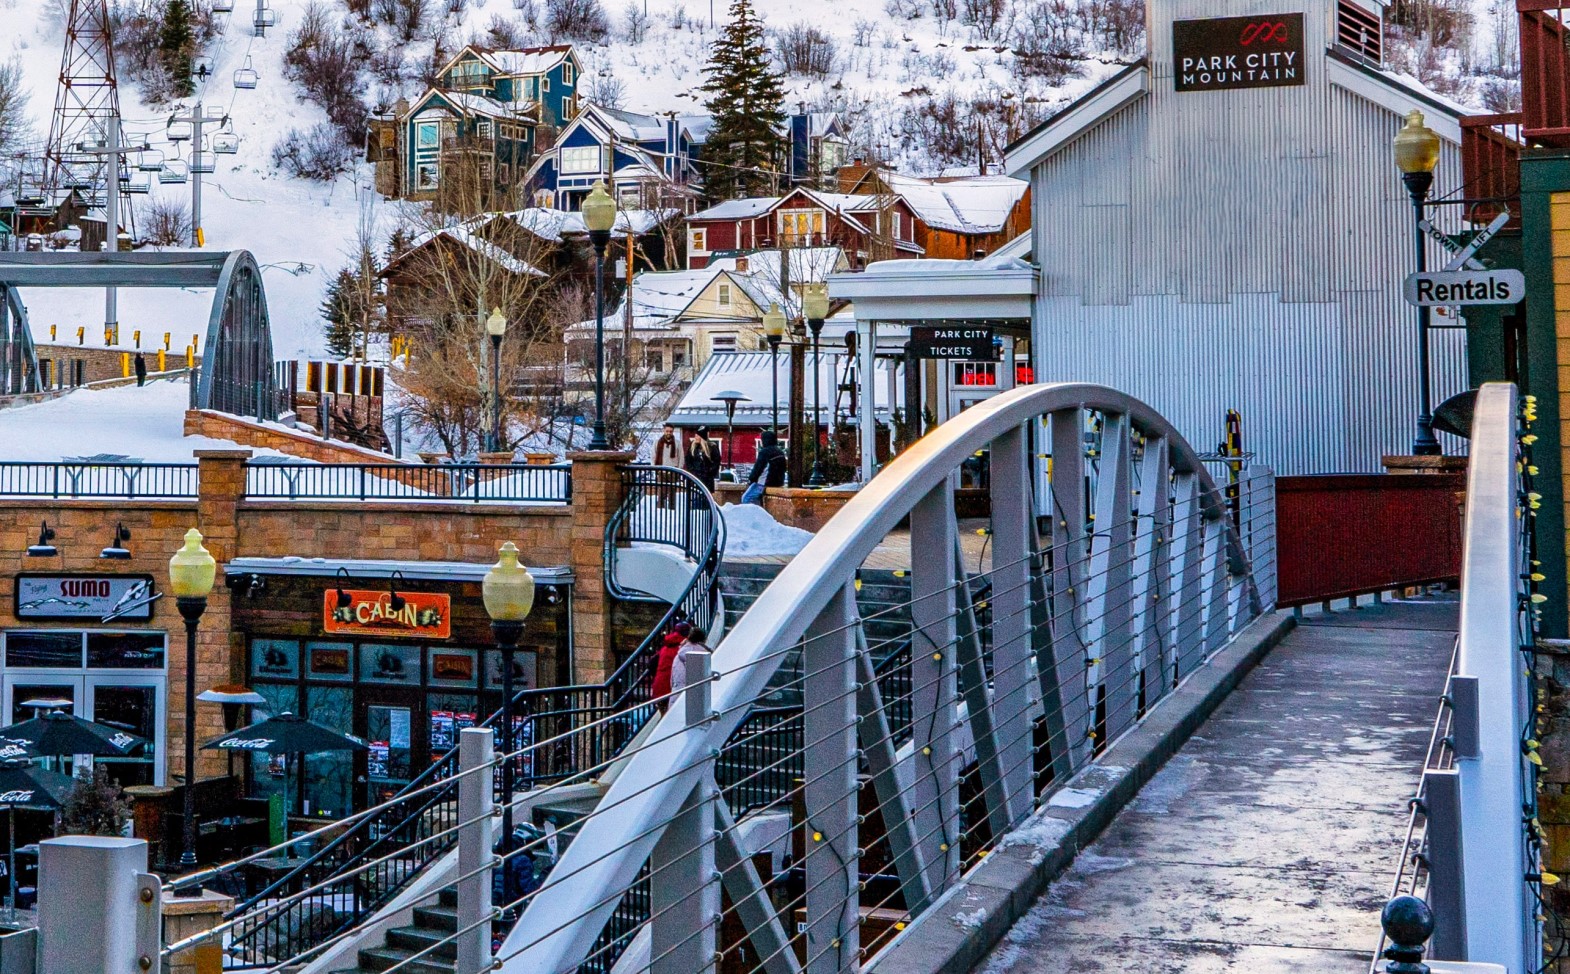 The Ultimate Guide to Spring and Winter Vacation in Park City